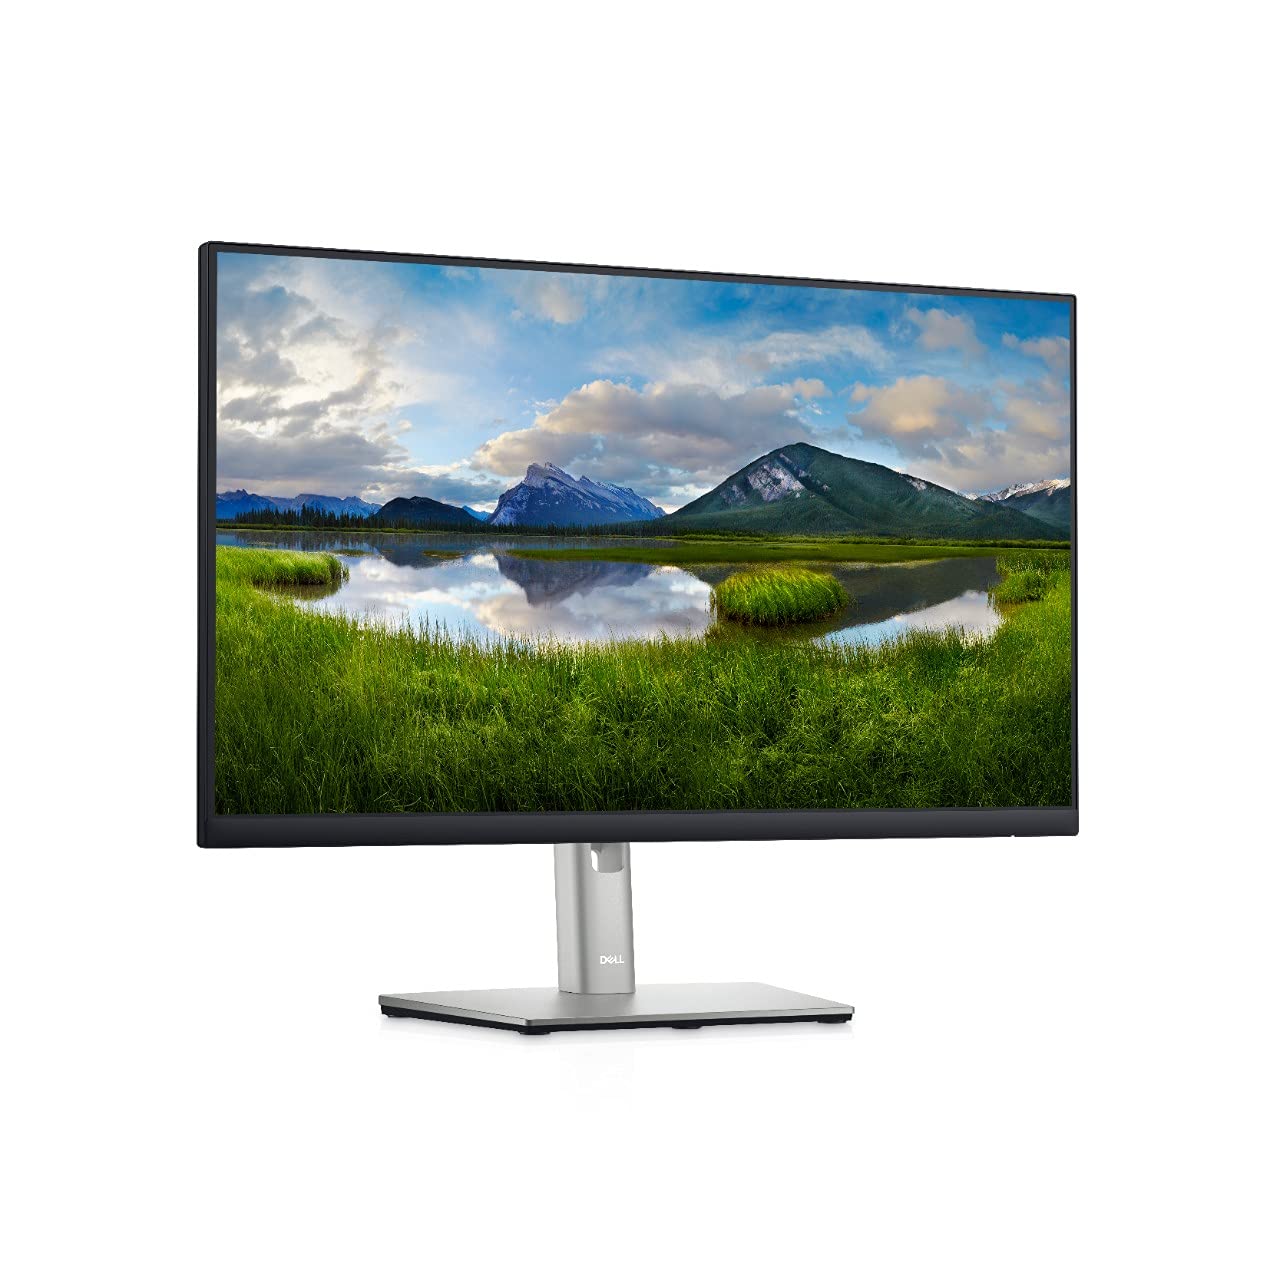 Dell 24 Monitor - P2422HE - Full HD 1080p, IPS Technology, USB-C Hub Monitor with Comfortview Plus,Black